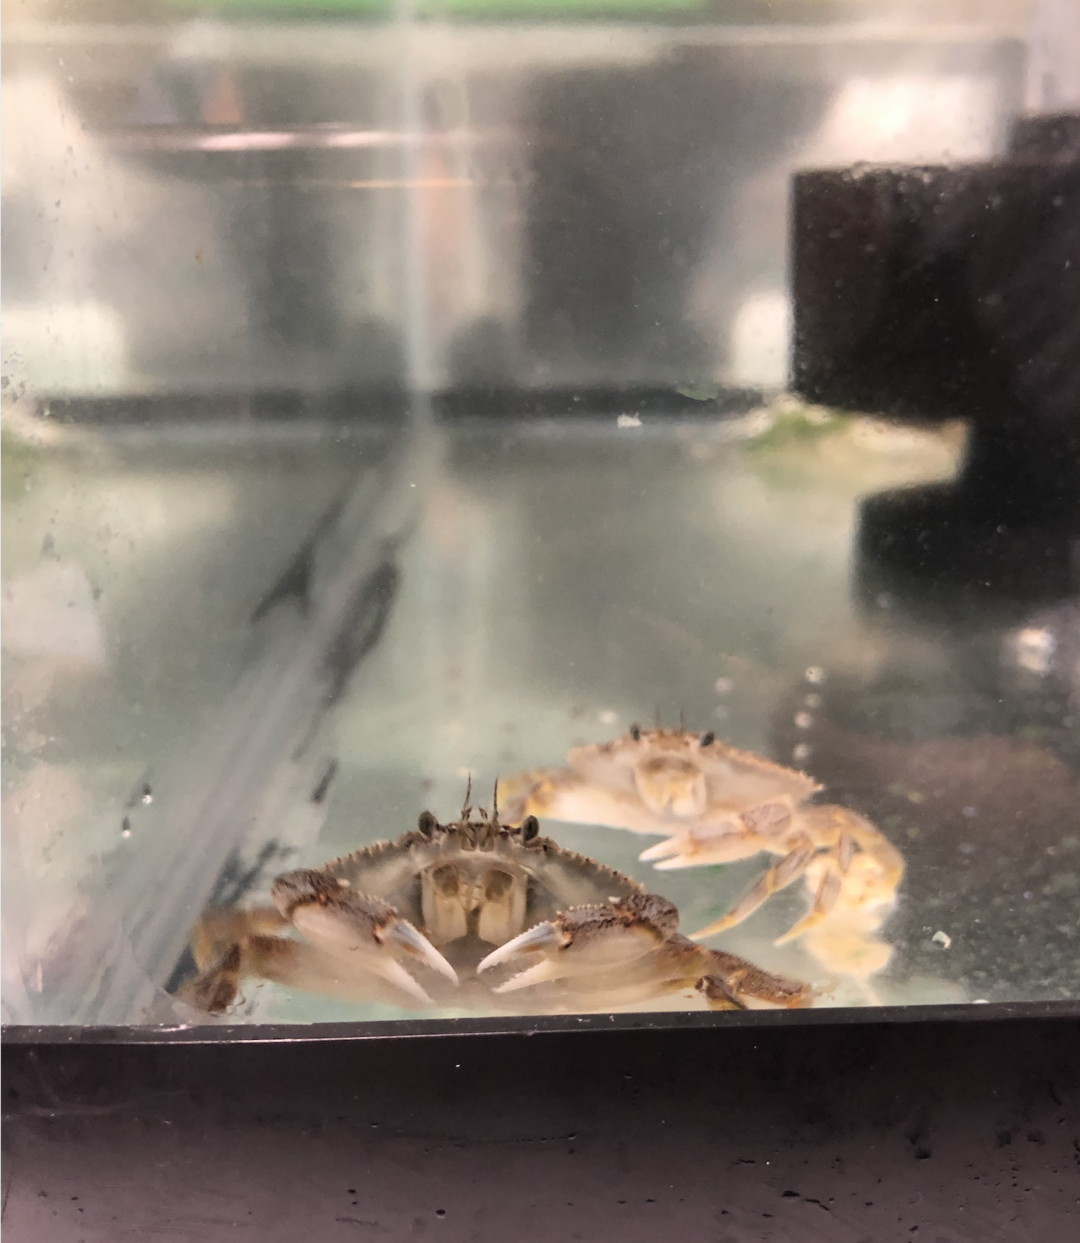 Dungeness crab juveniles in a cage